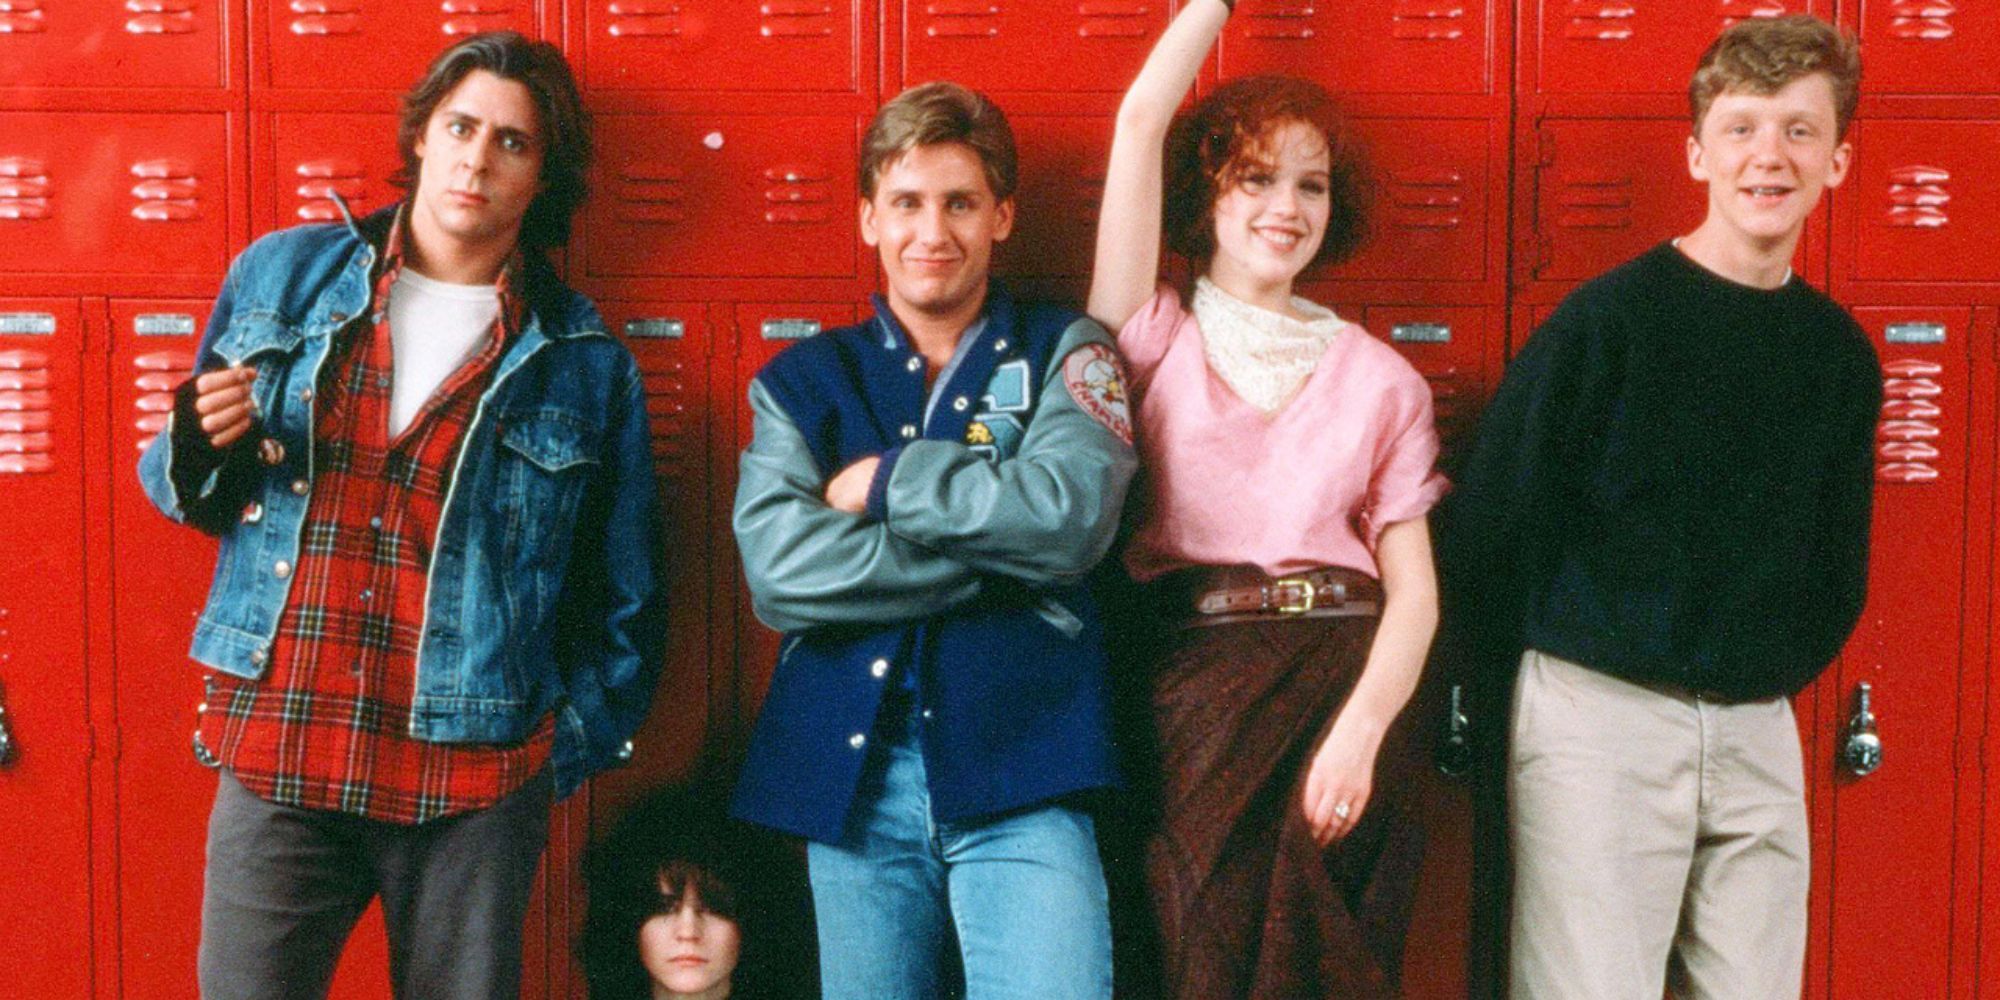 The cast lineup against a locker in The Breakfast Club